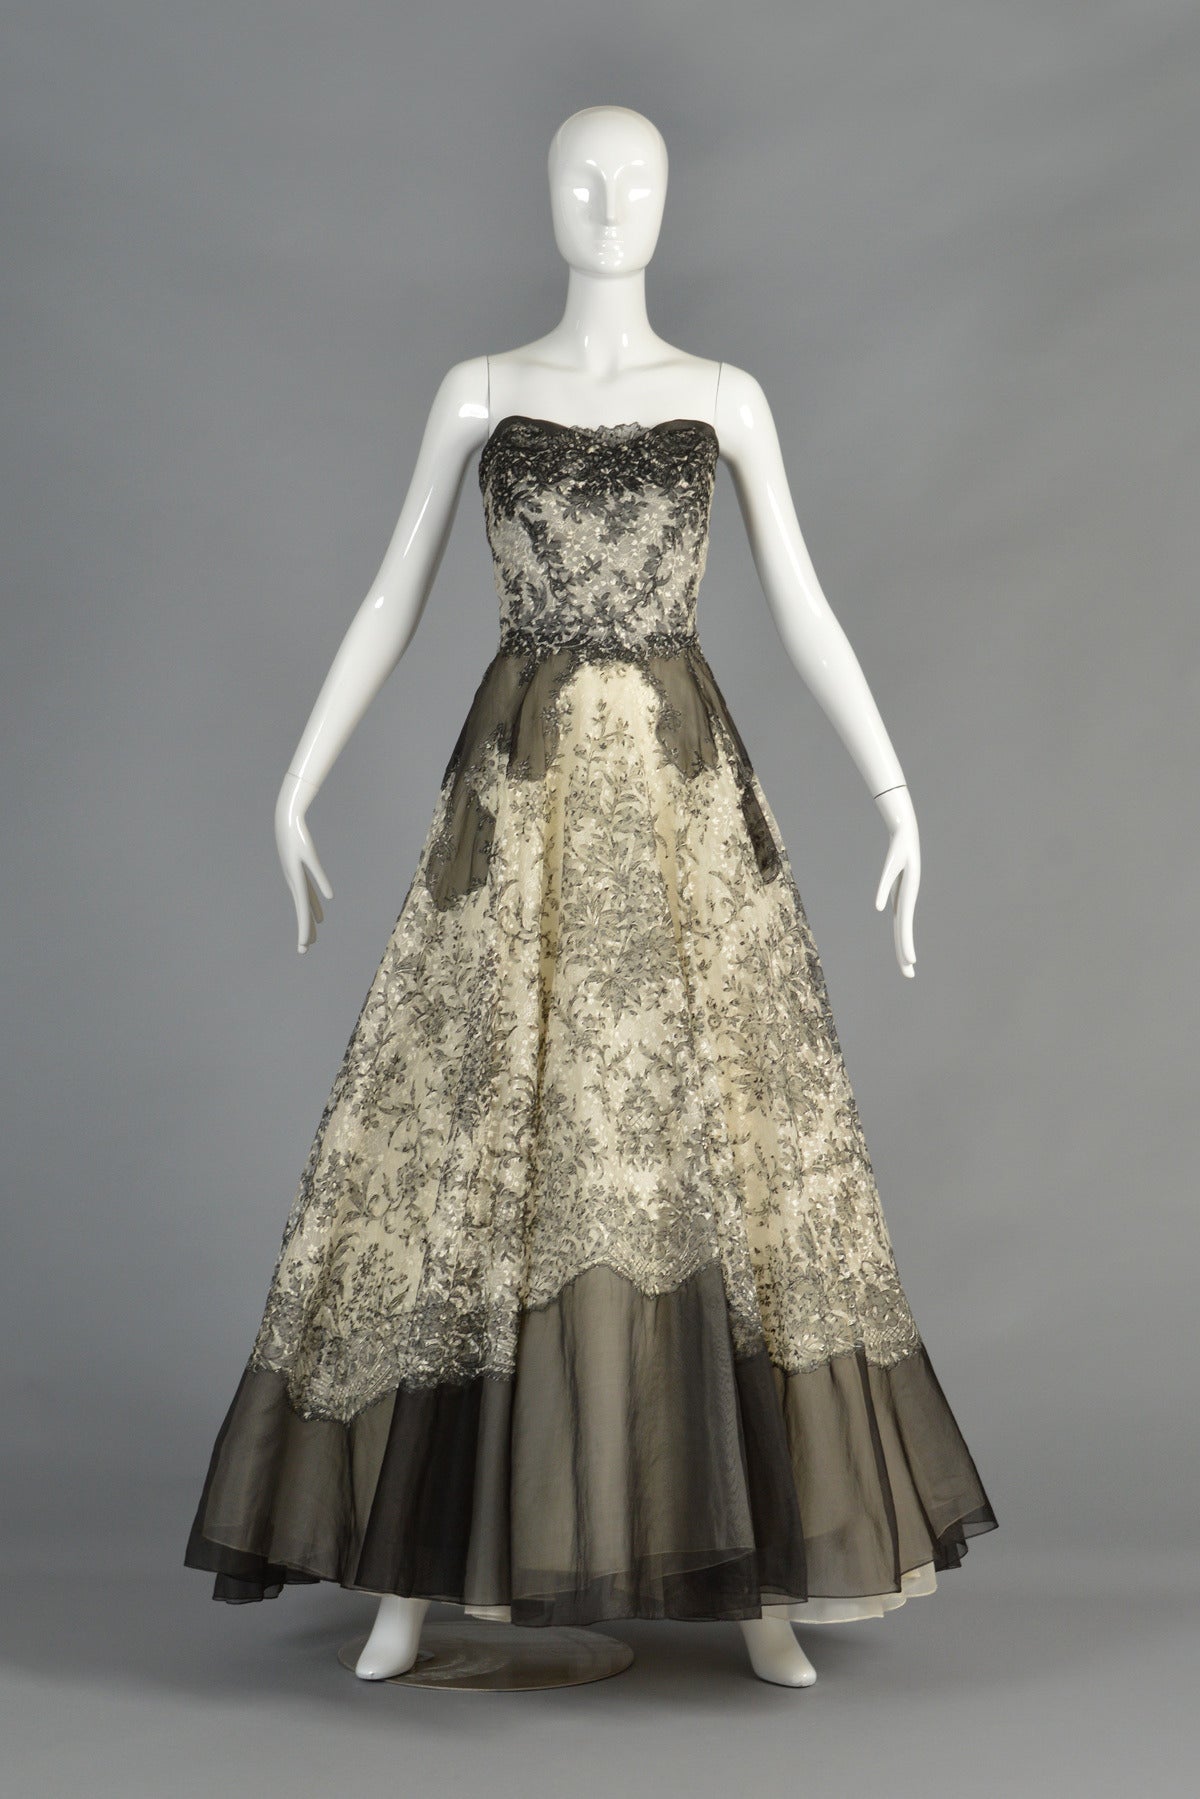 Absolutely stunning 1950s organza and lace gown. Truly gorgeous and fit for a queen and is certainly the embodiment of old Hollywood glamour! We believe this dress could potentially be a Helen Rose but alas, the only remaining label is from Nan